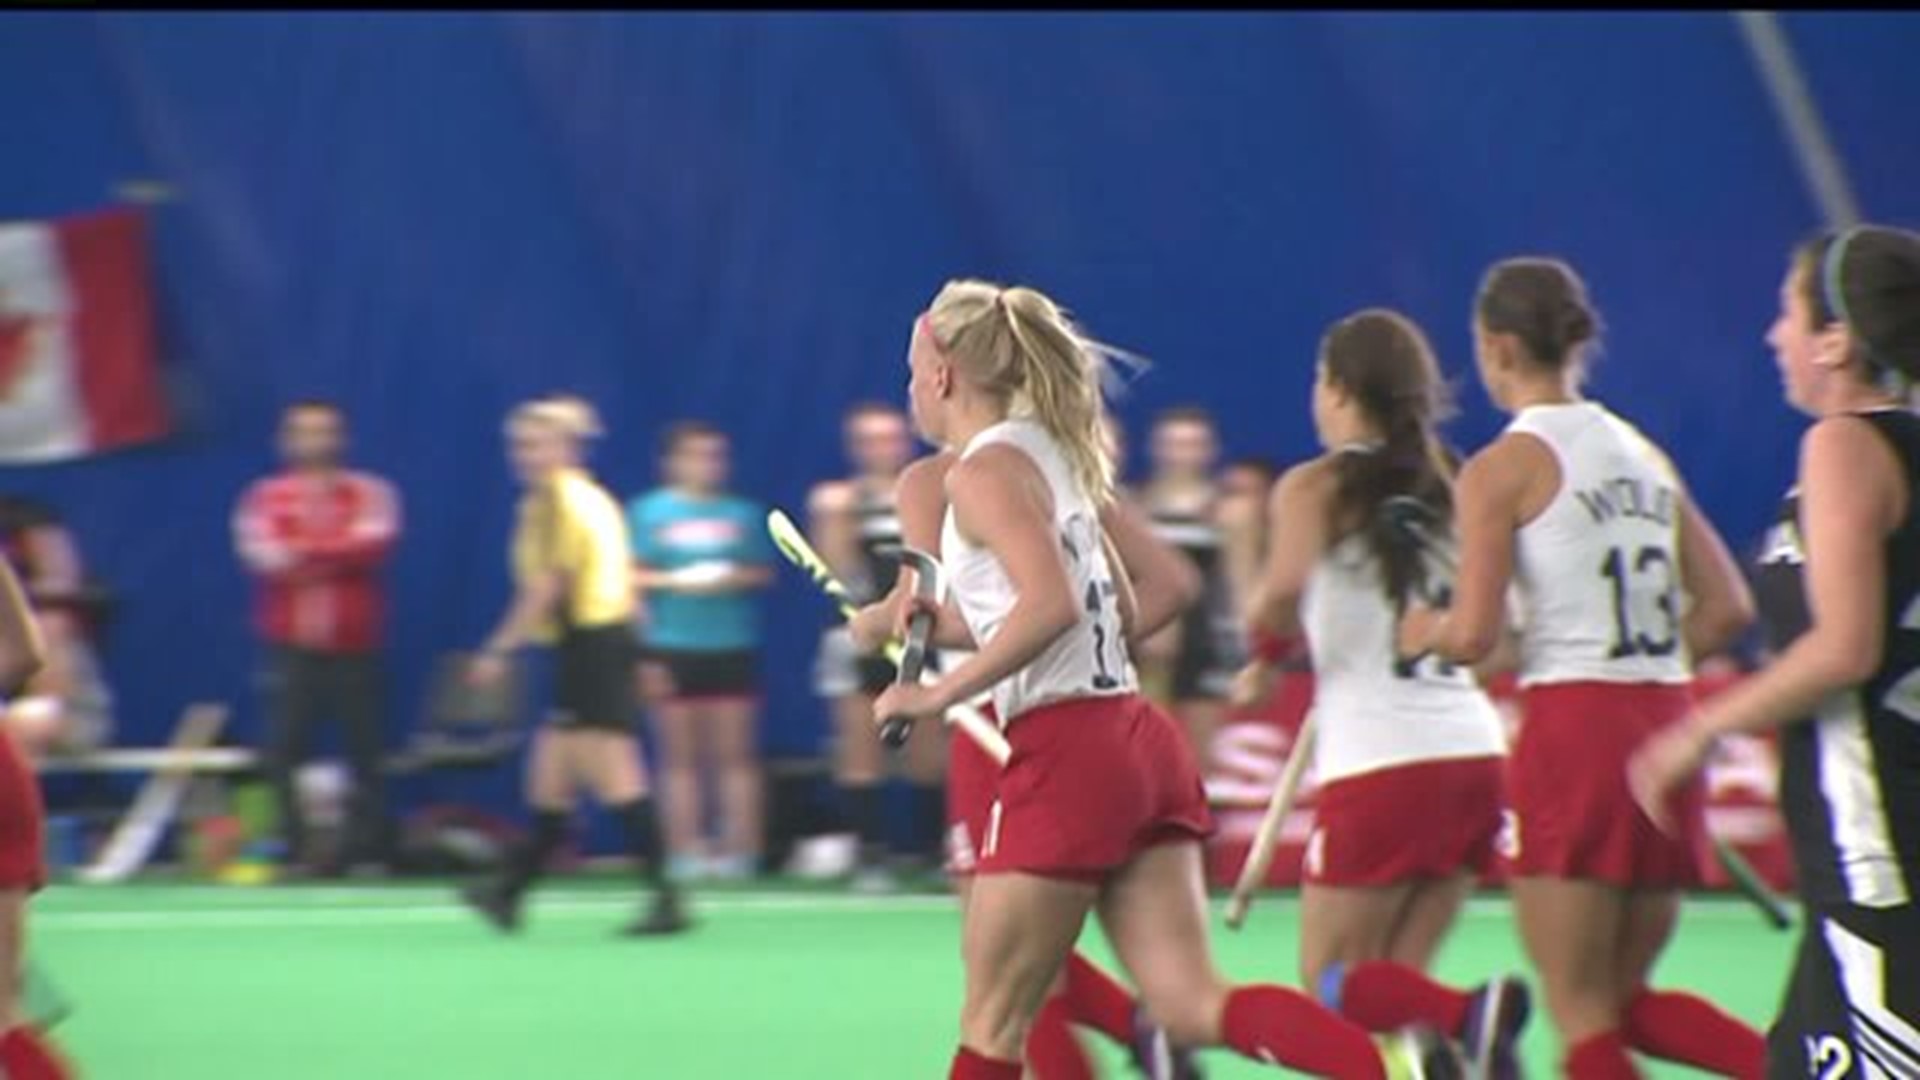 Lancaster County is home to the USA women`s field hockey team